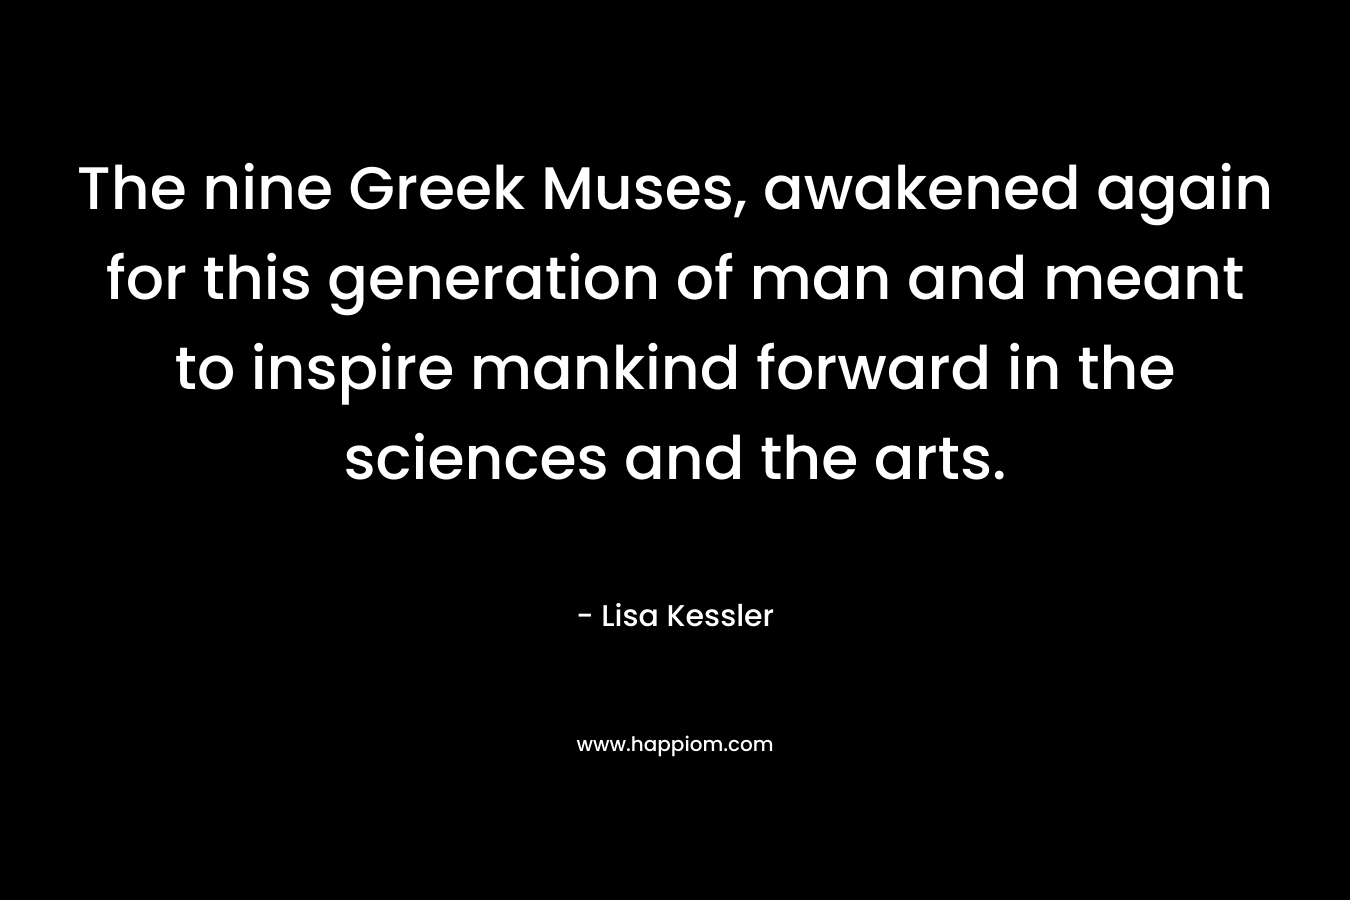 The nine Greek Muses, awakened again for this generation of man and meant to inspire mankind forward in the sciences and the arts. – Lisa Kessler